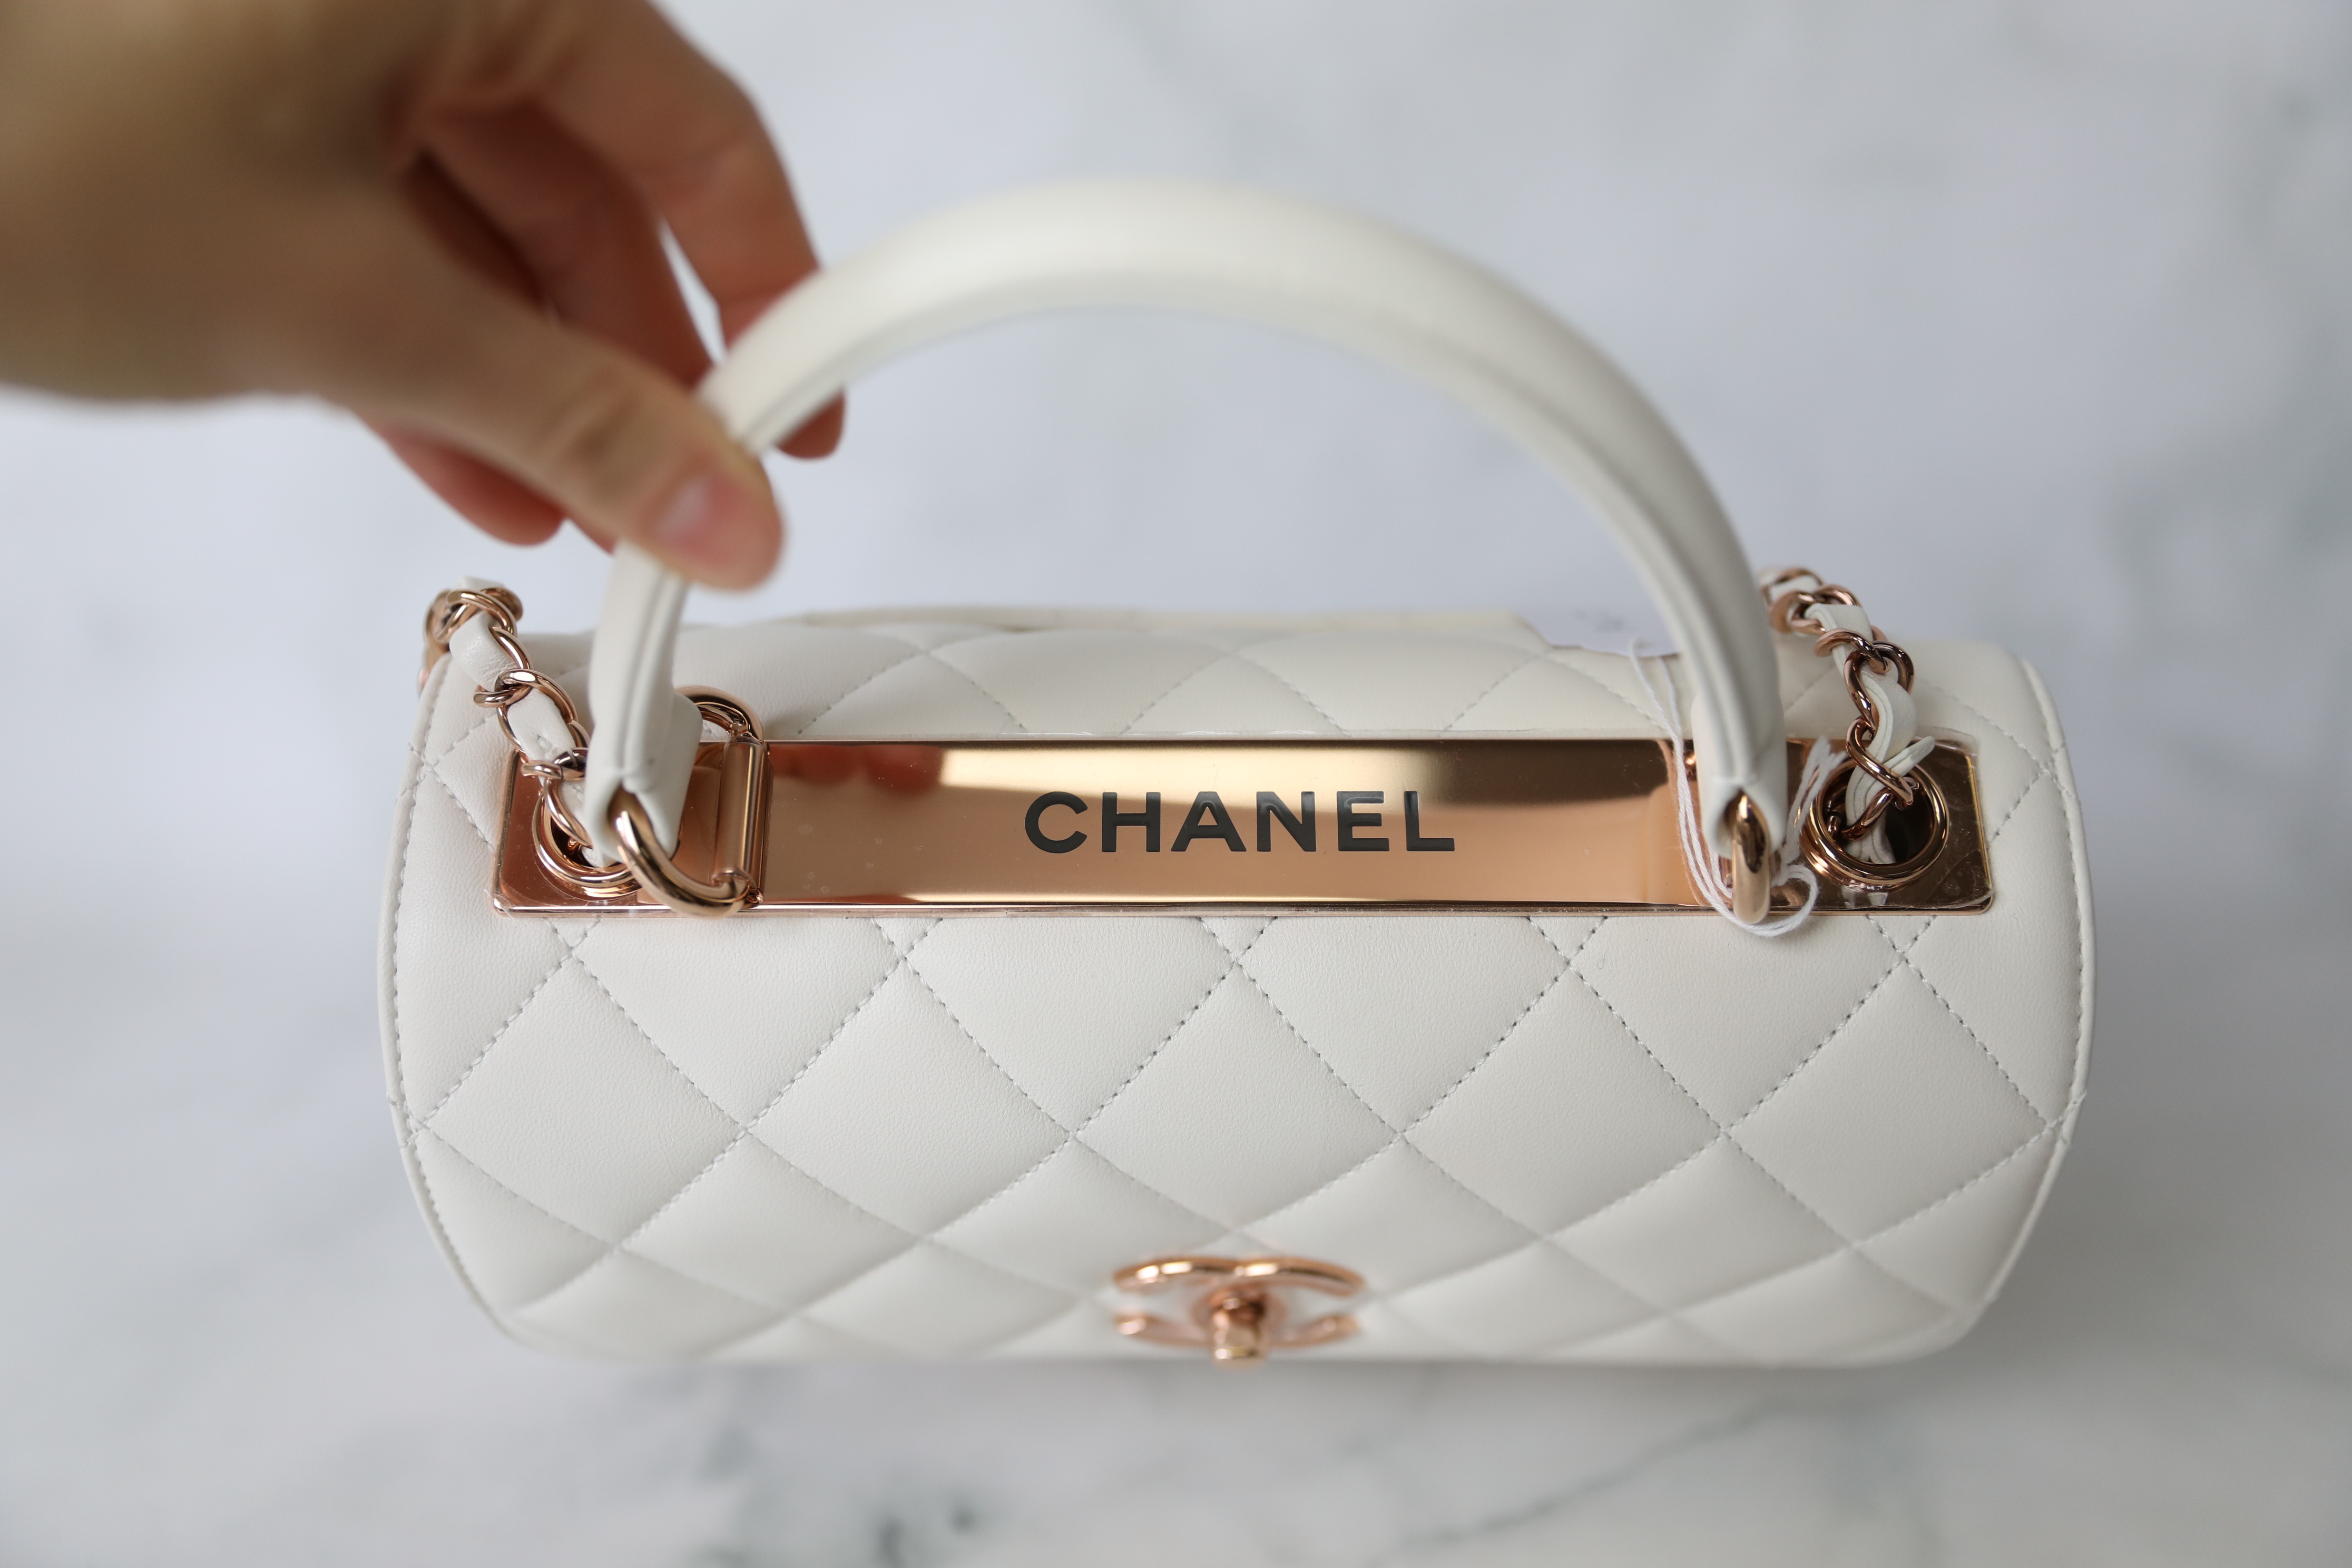 Chanel Trendy Small, White Lambskin with Rose Gold Hardware, New in Box  WA001